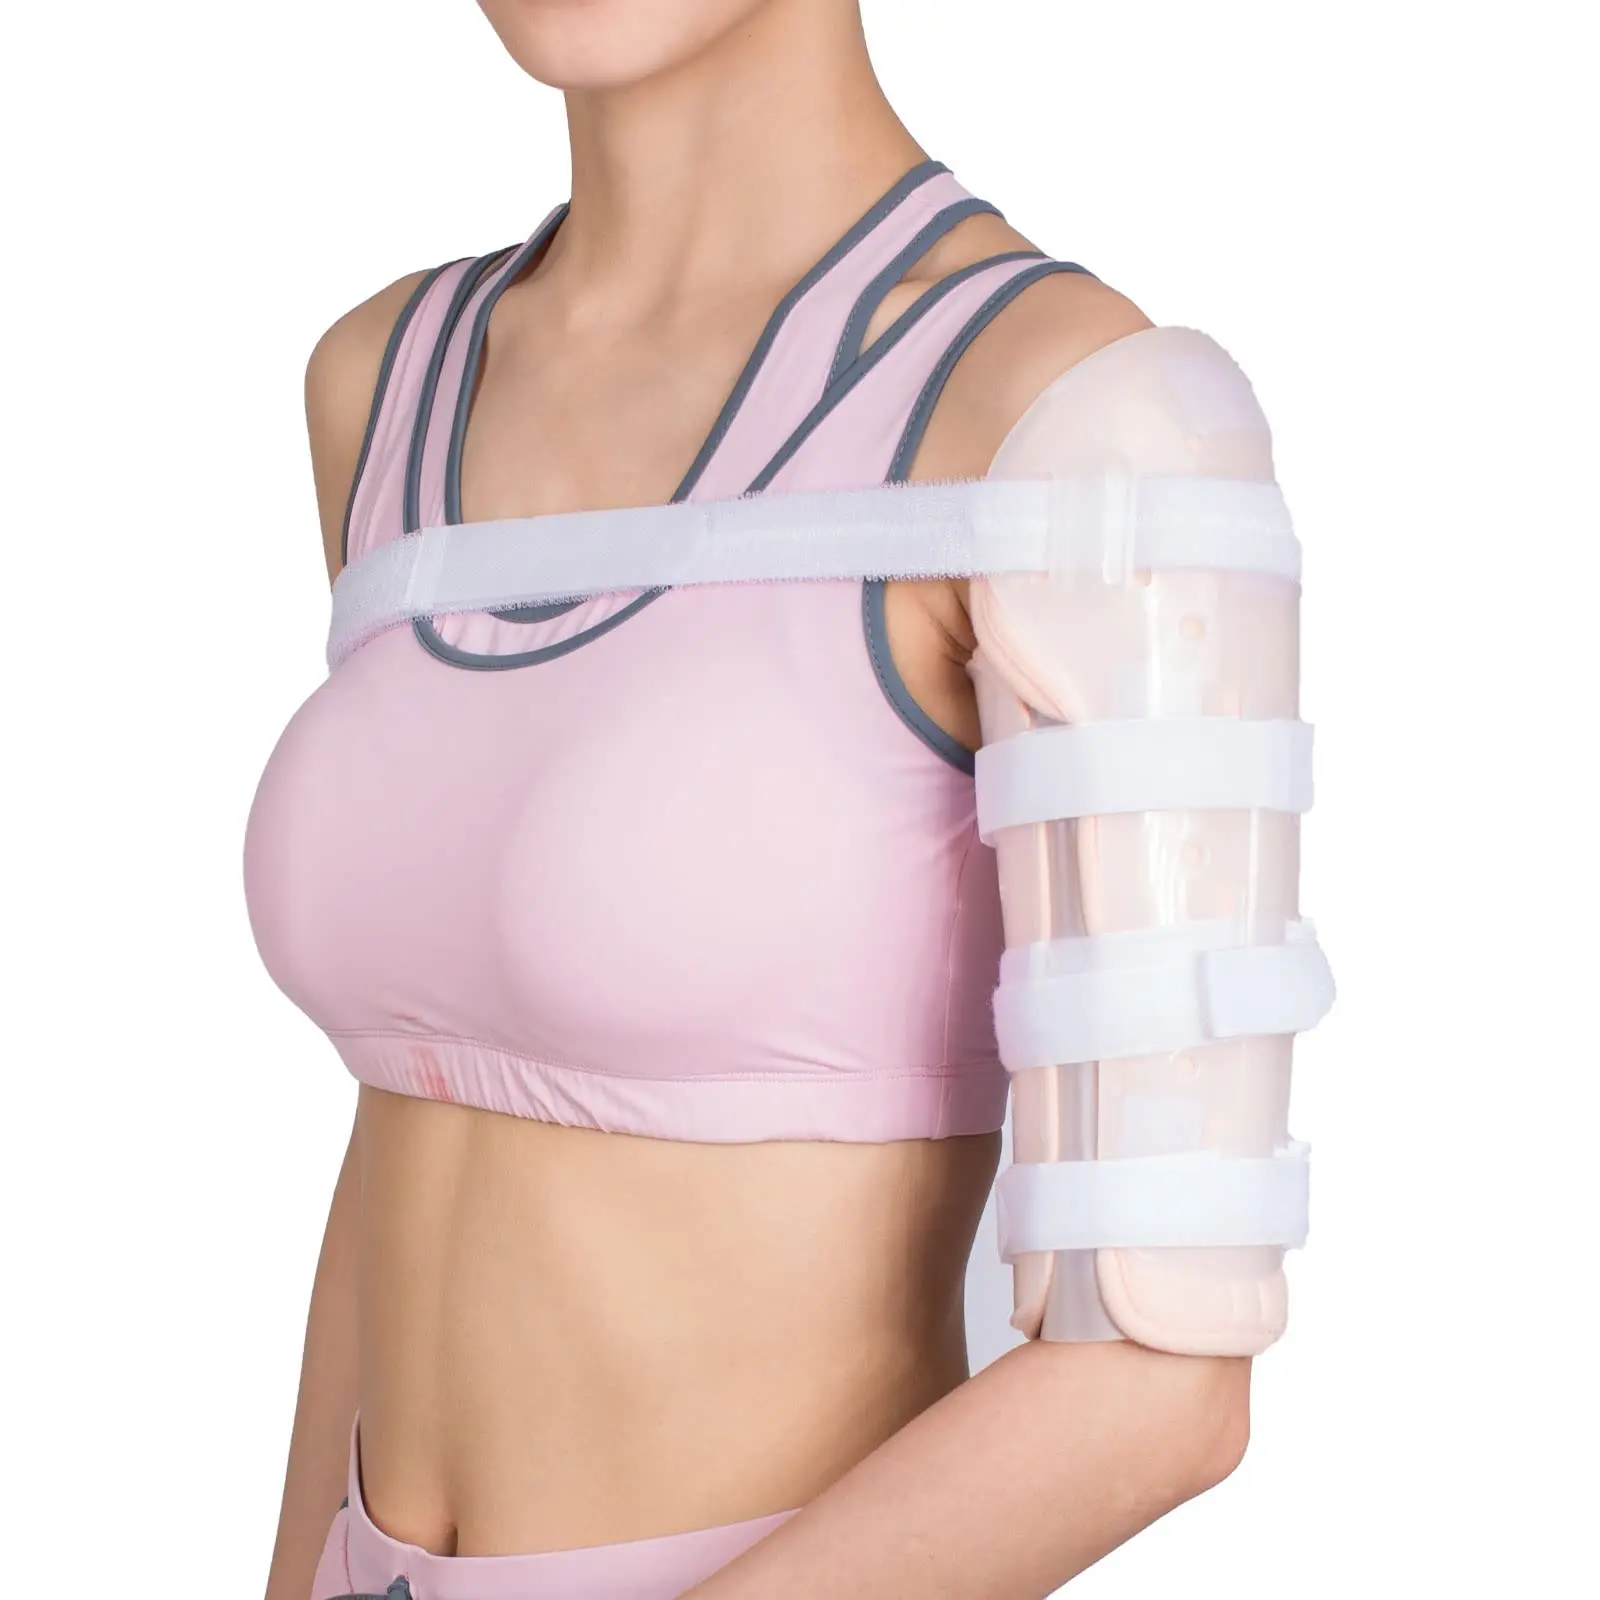 

Tairibousy Posture corrector Shaft Fracture Splint Lightweight Humeral Fracture Brace for Upper Arm, Shoulder,Long-Bone Humerus